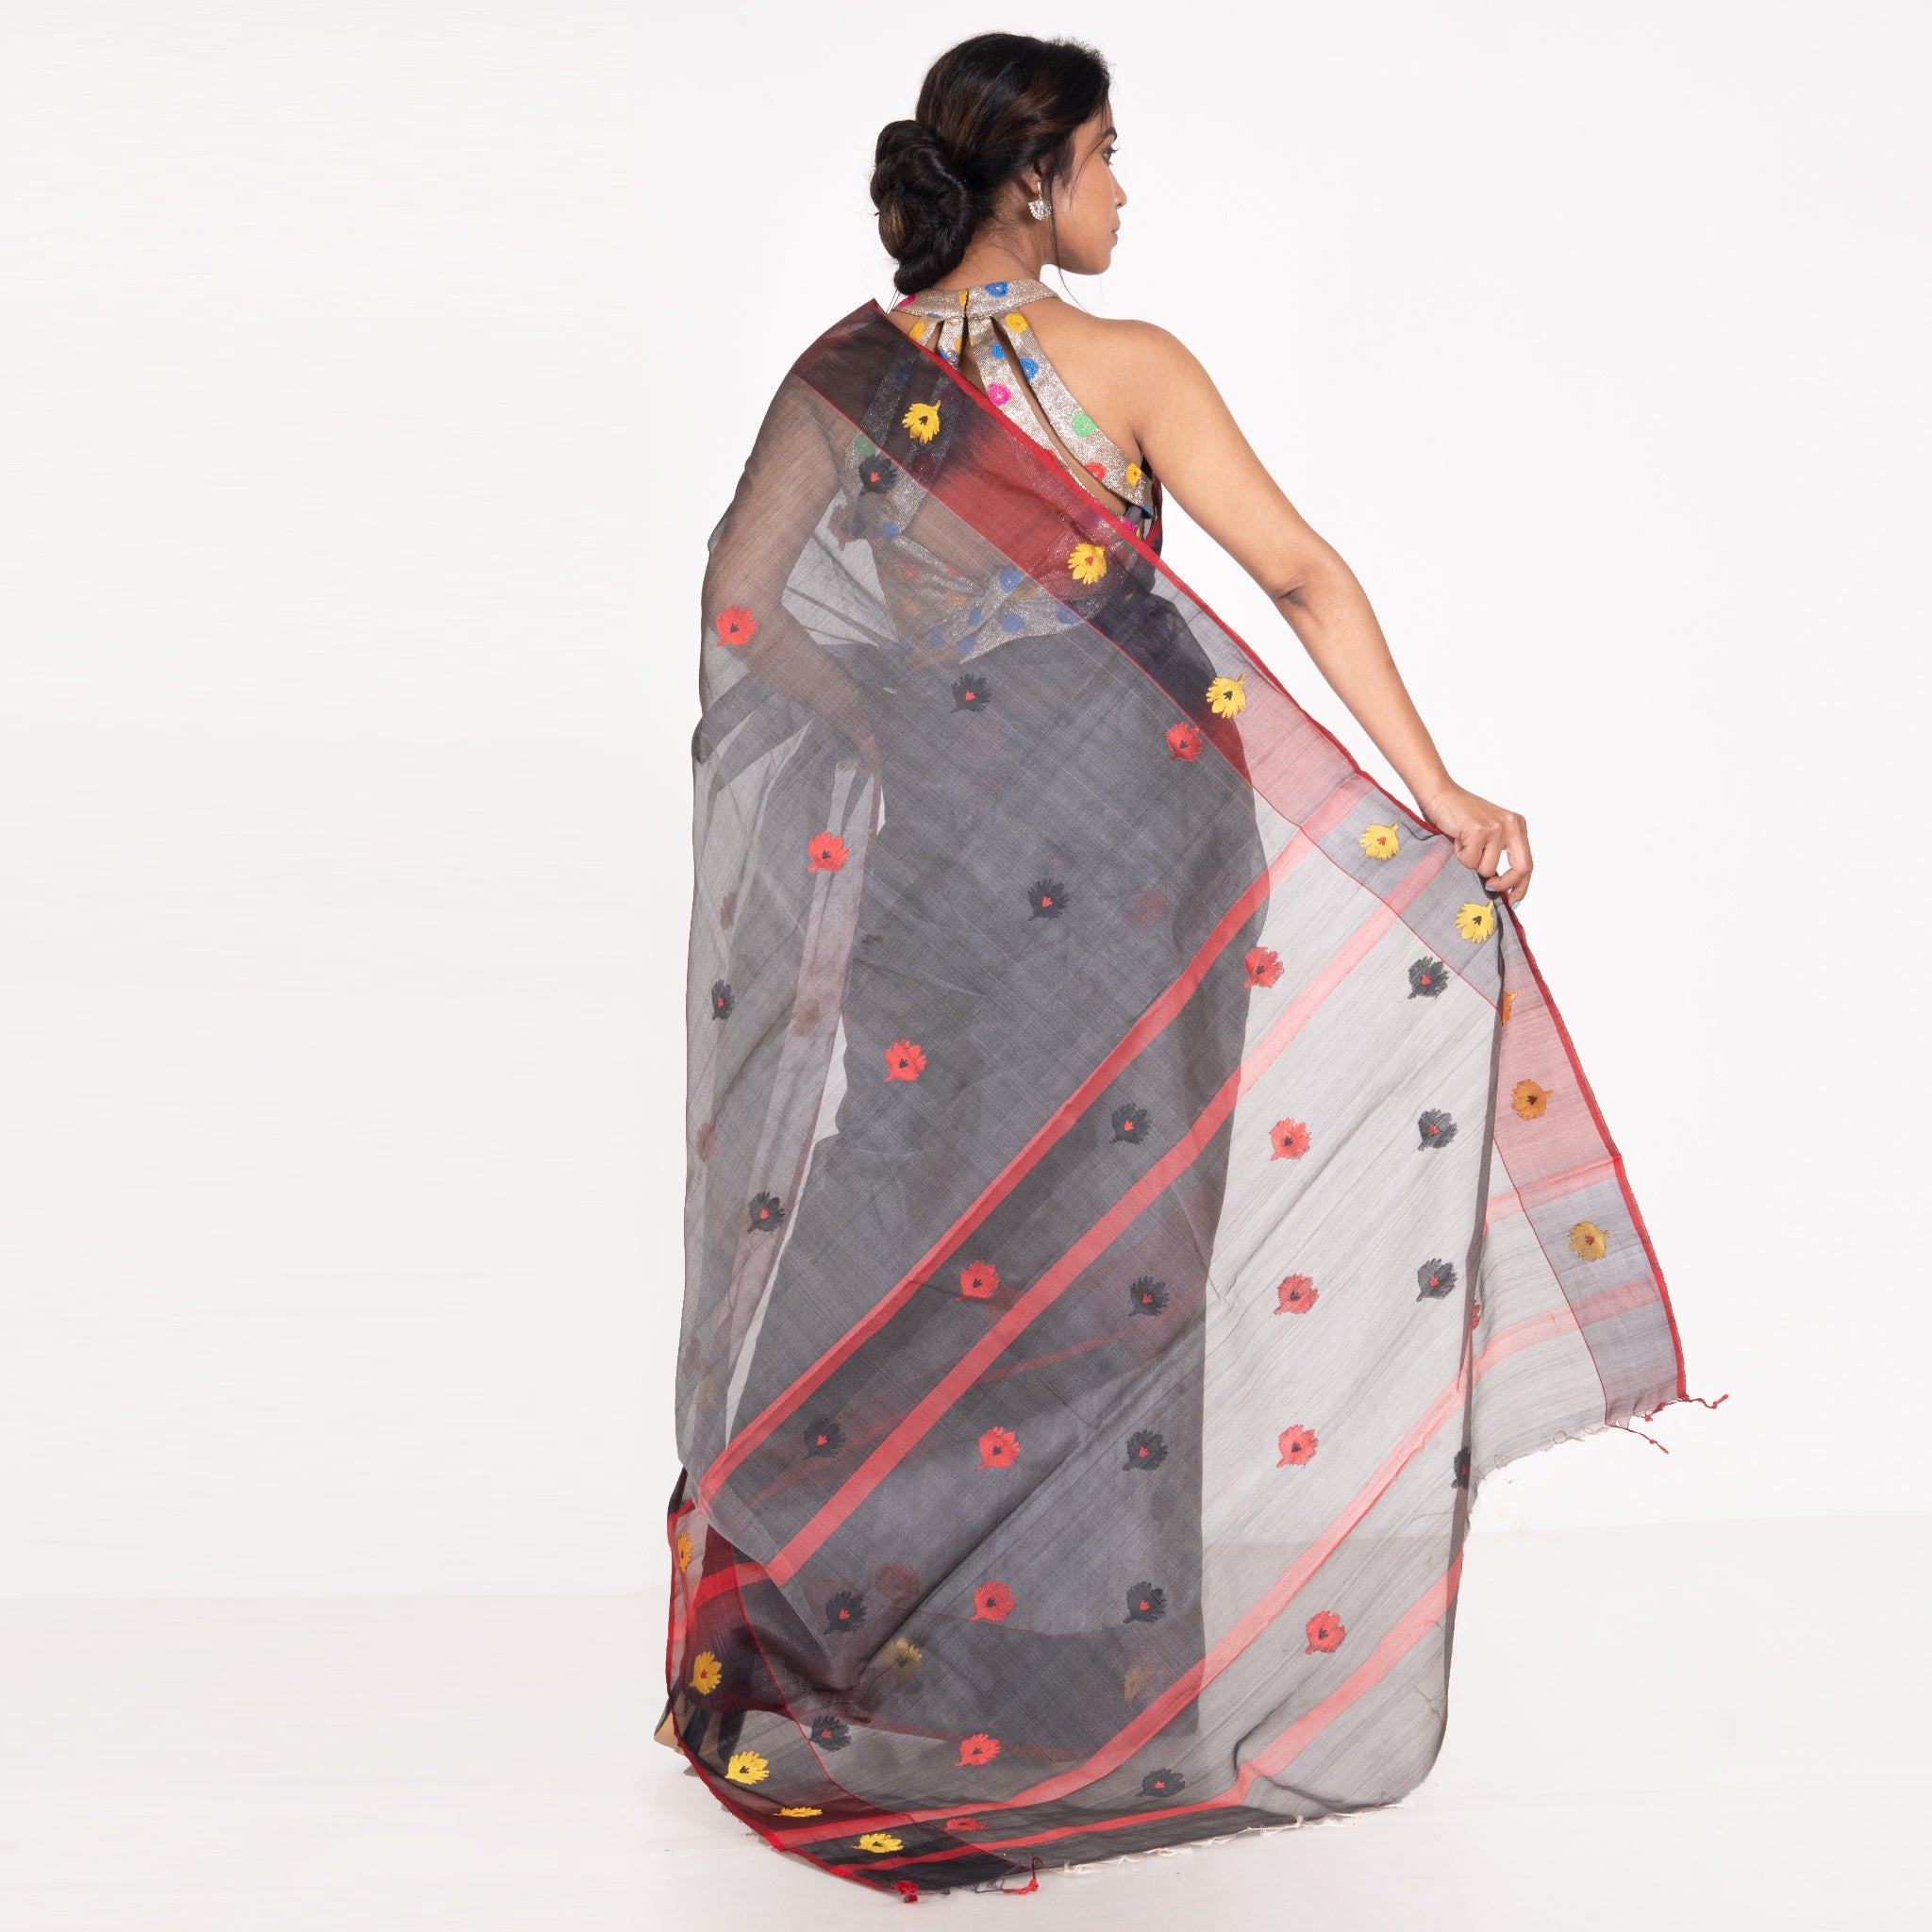 Women's Charcoal Grey  Silk Chanderi Saree With Red An Black Border Booti - Boveee